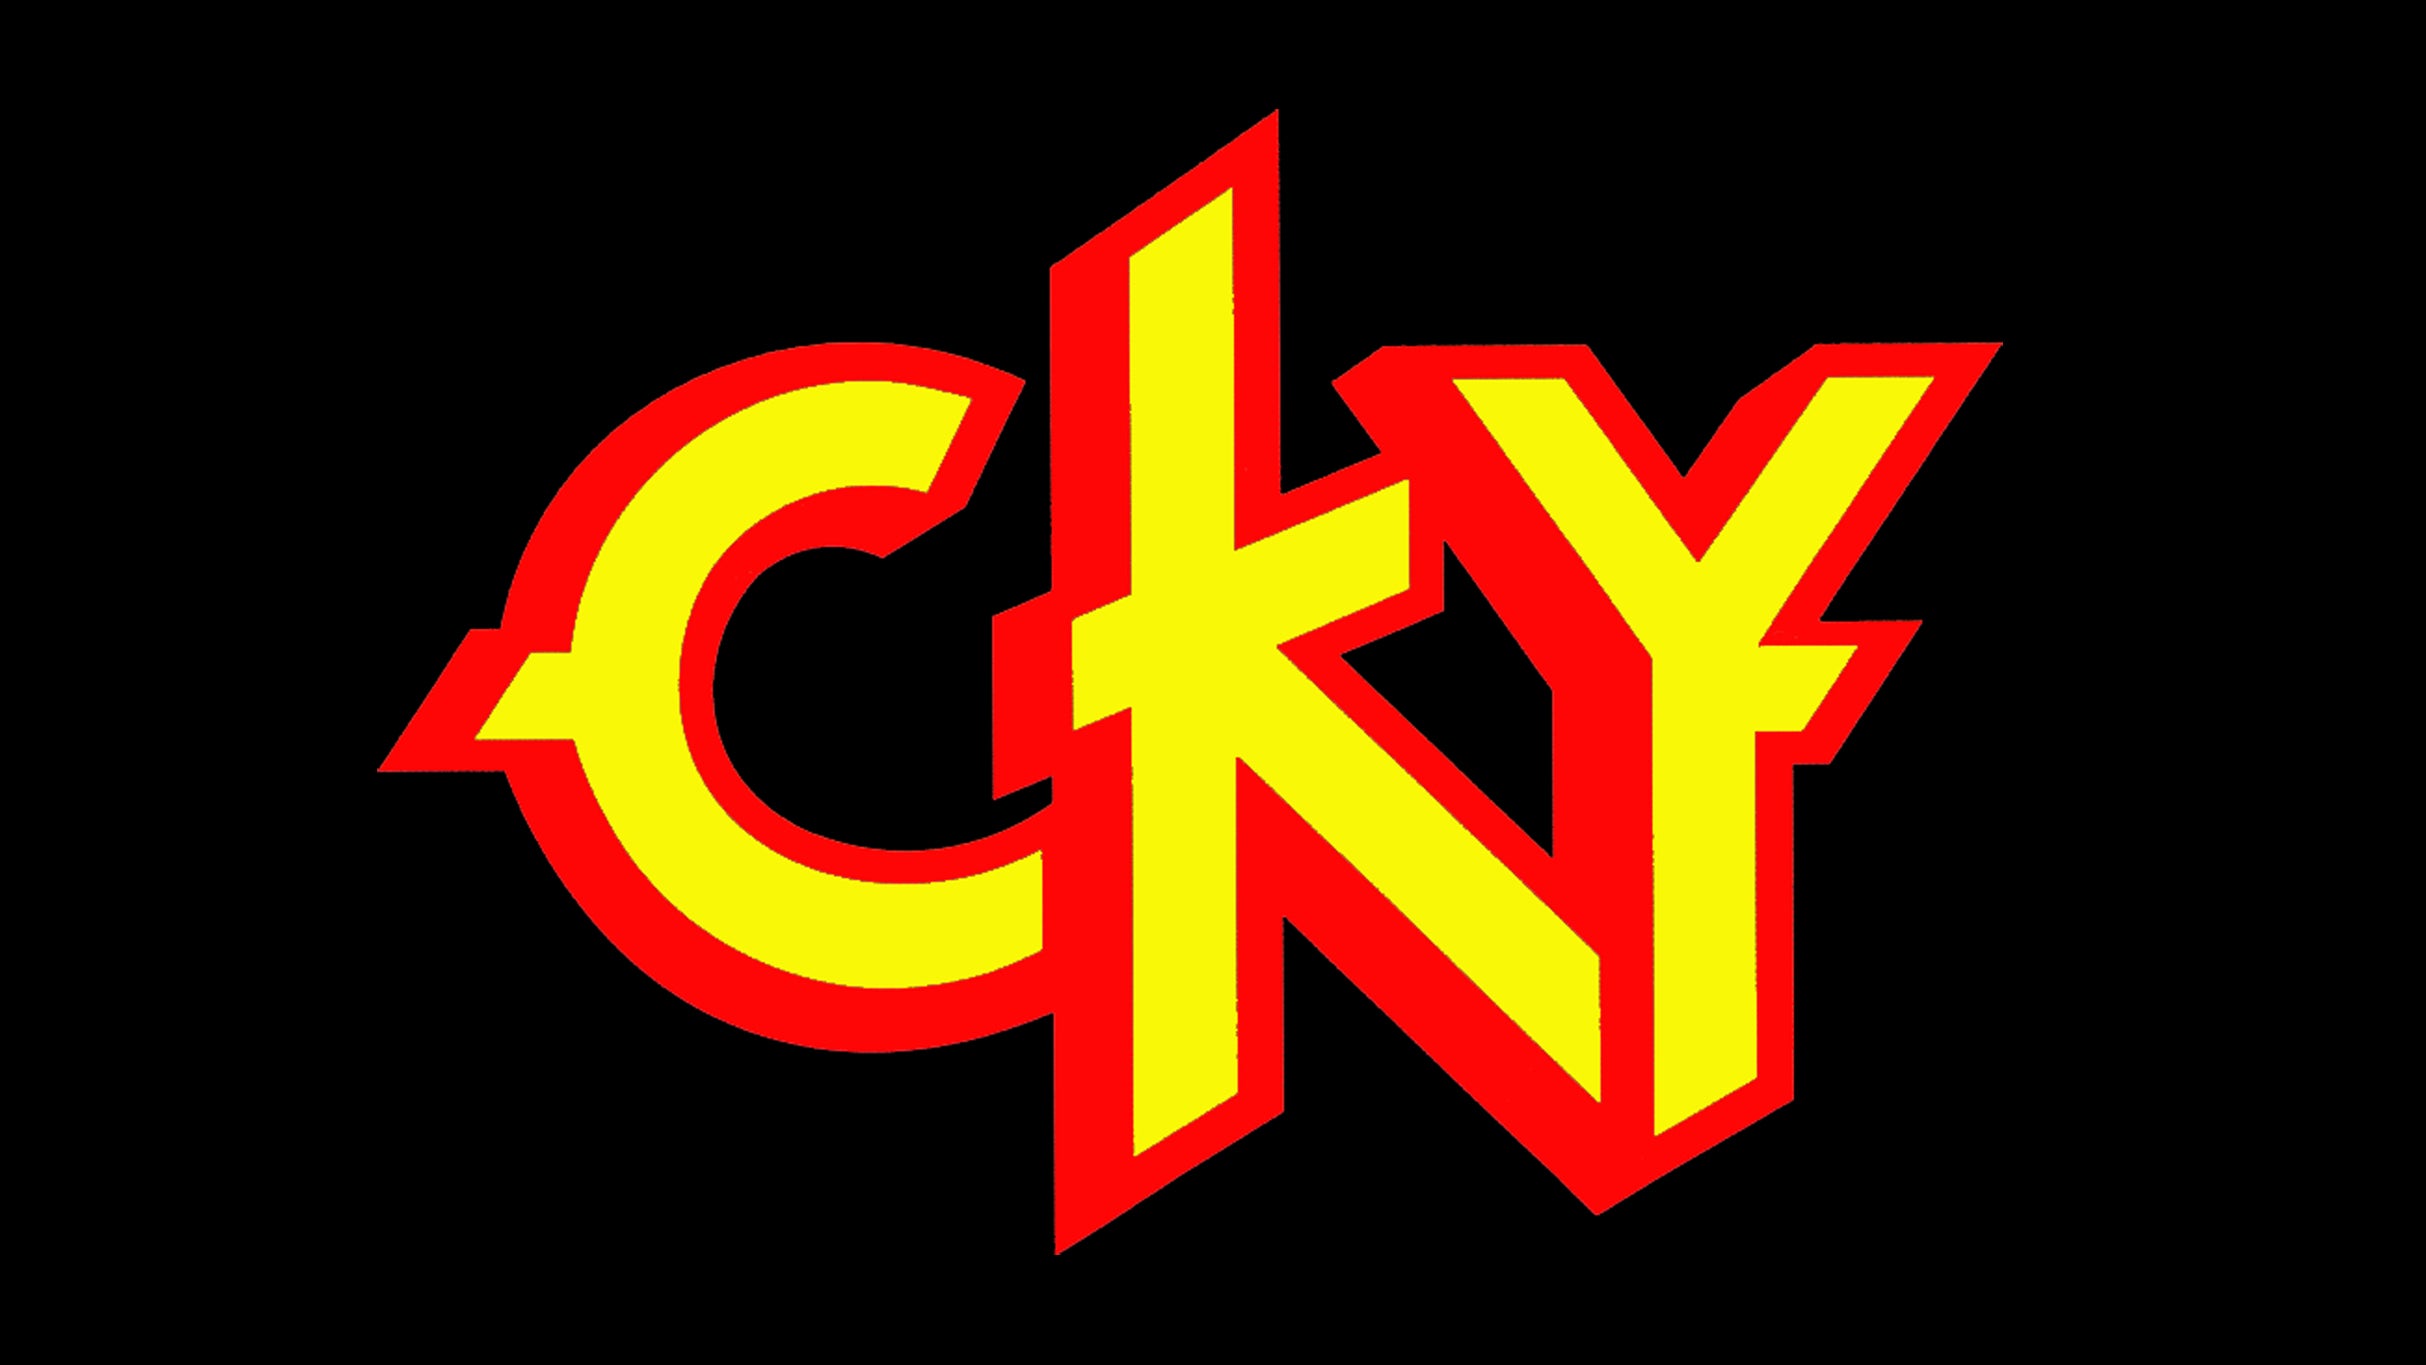 CKY w/ Crobot at The Norva